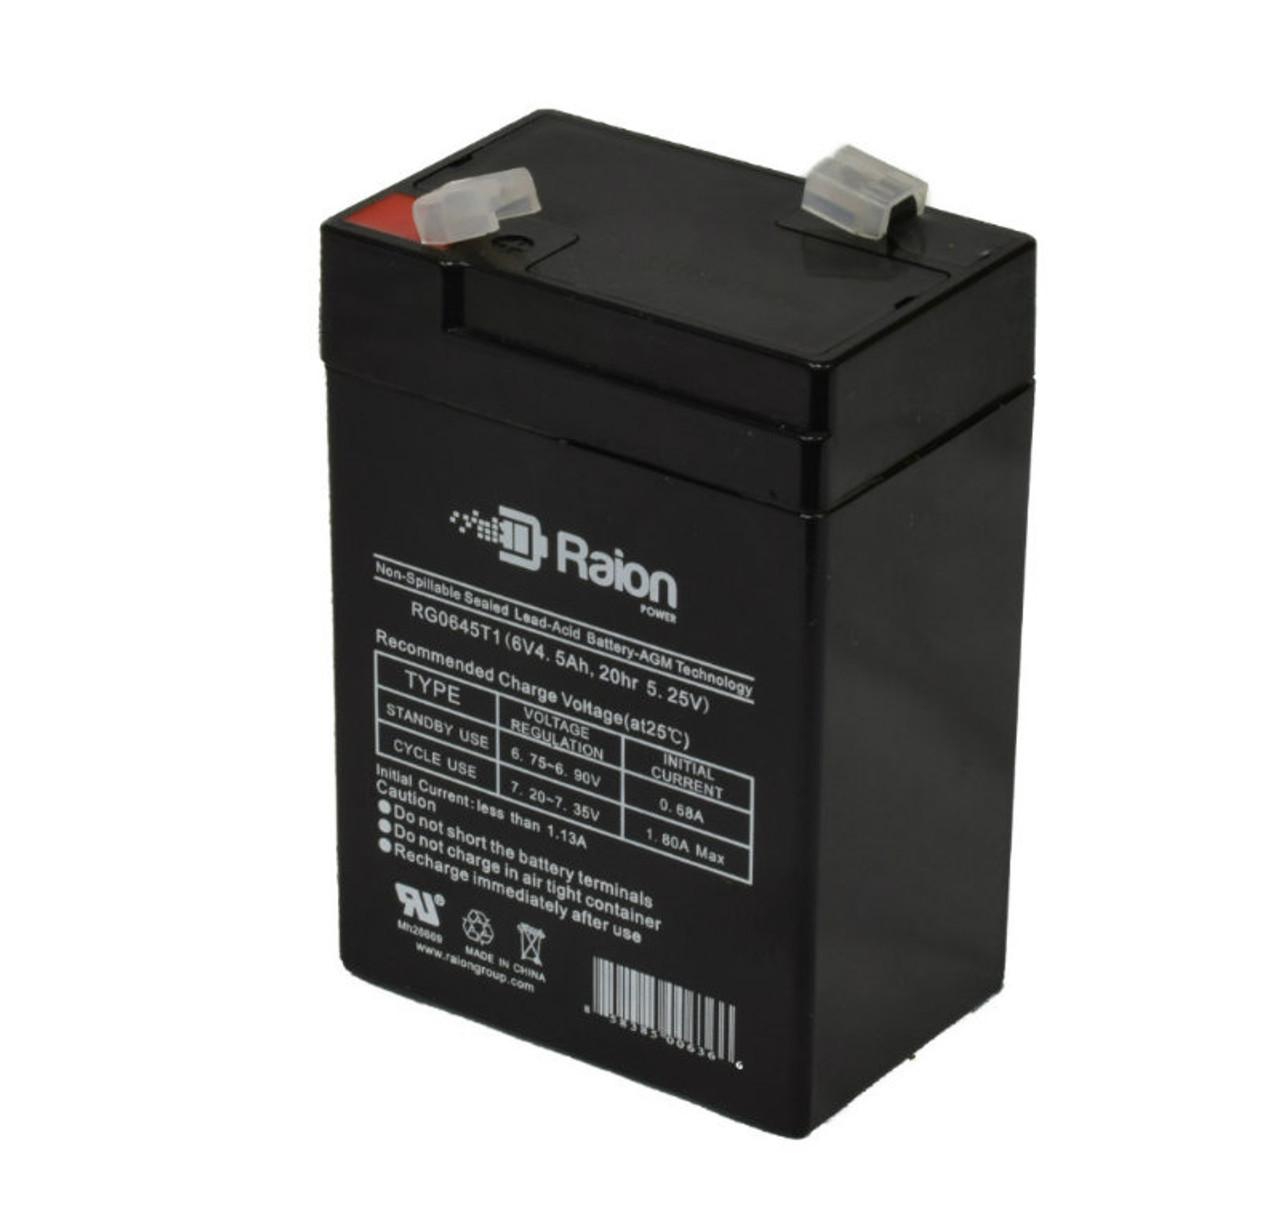 Raion Power RG0645T1 6V 4.5Ah Replacement Battery Cartridge for TLV650